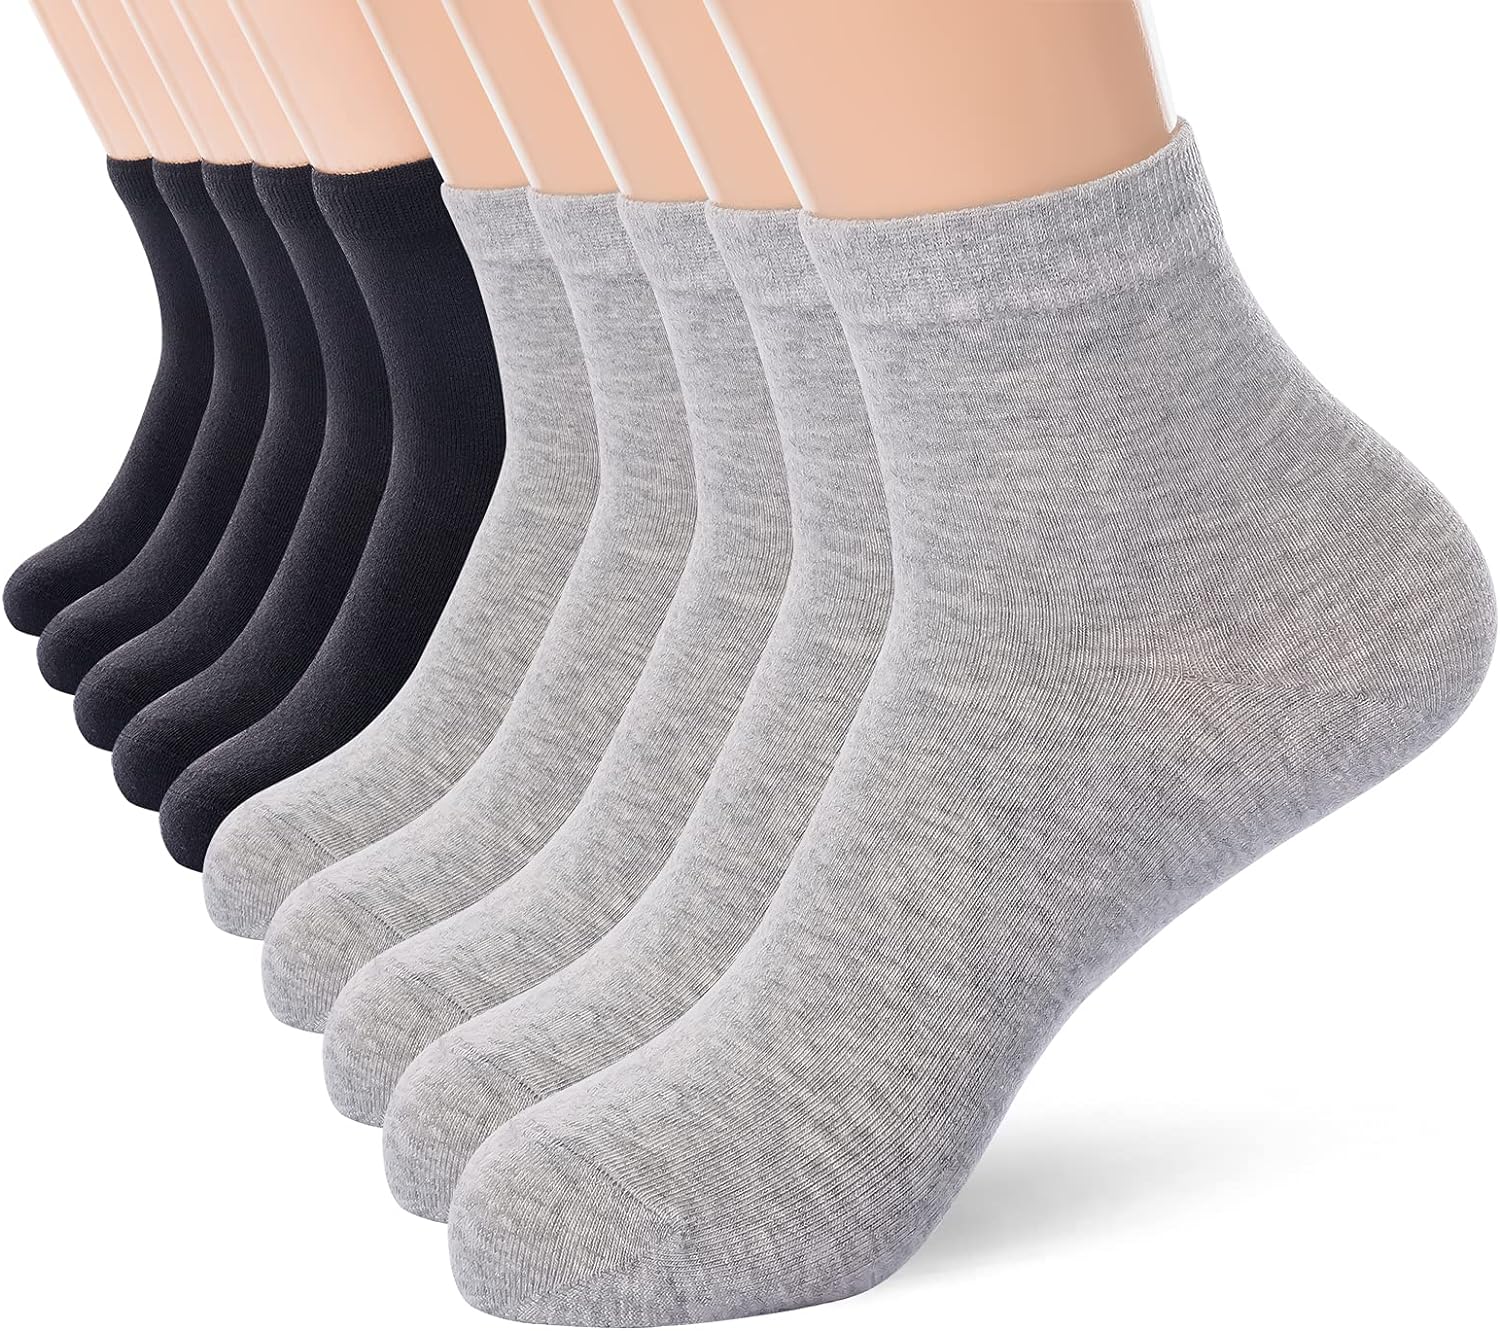 Comfortably Cushioned for All-Day Wear: Avia Super Soft Ankle Socks Review